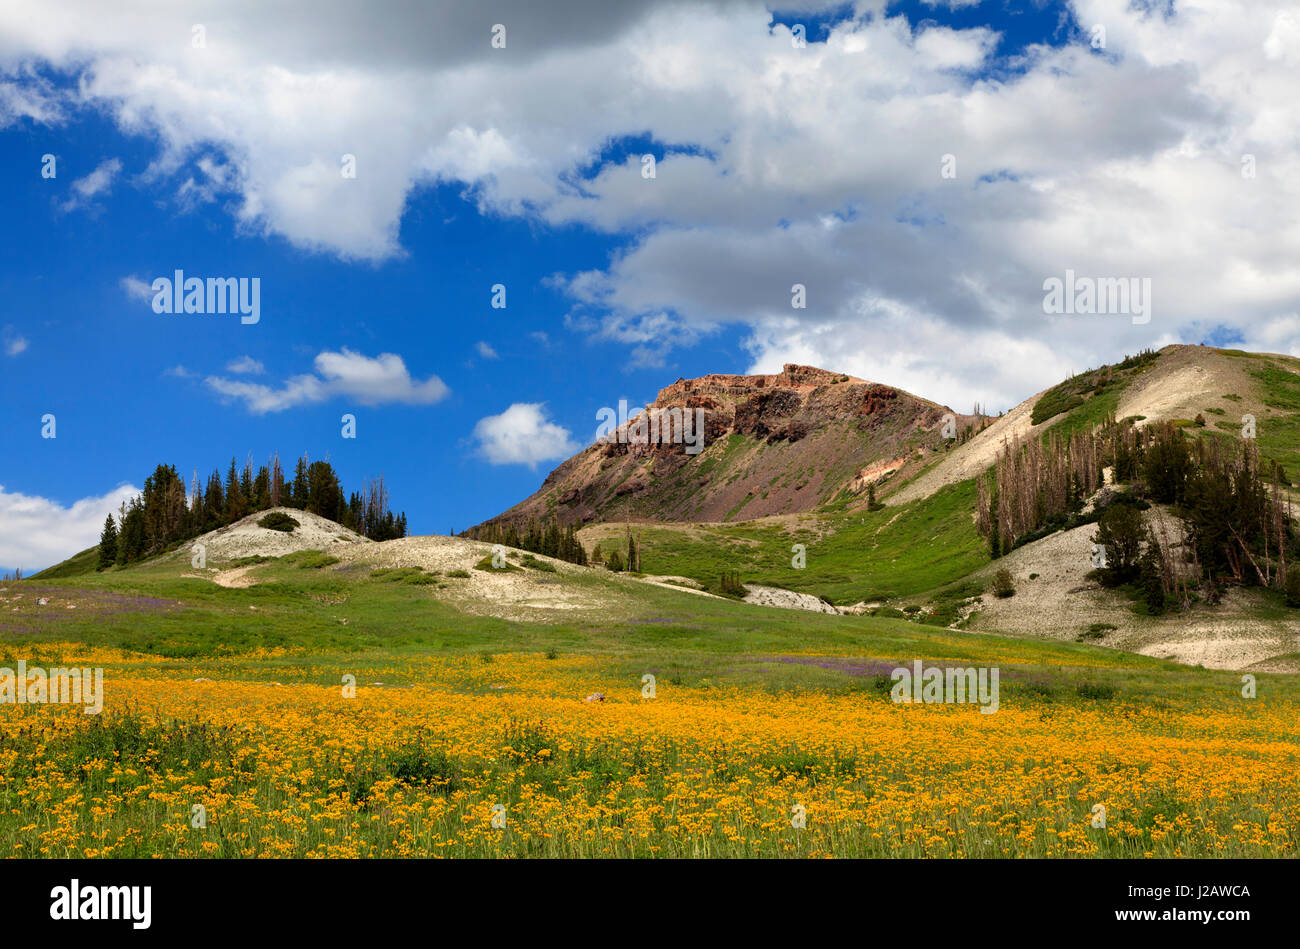 This is a striking view of yellow groundsel in blossom at the base of Brian Head Peak in the town of Brian Head, Utah. Stock Photo